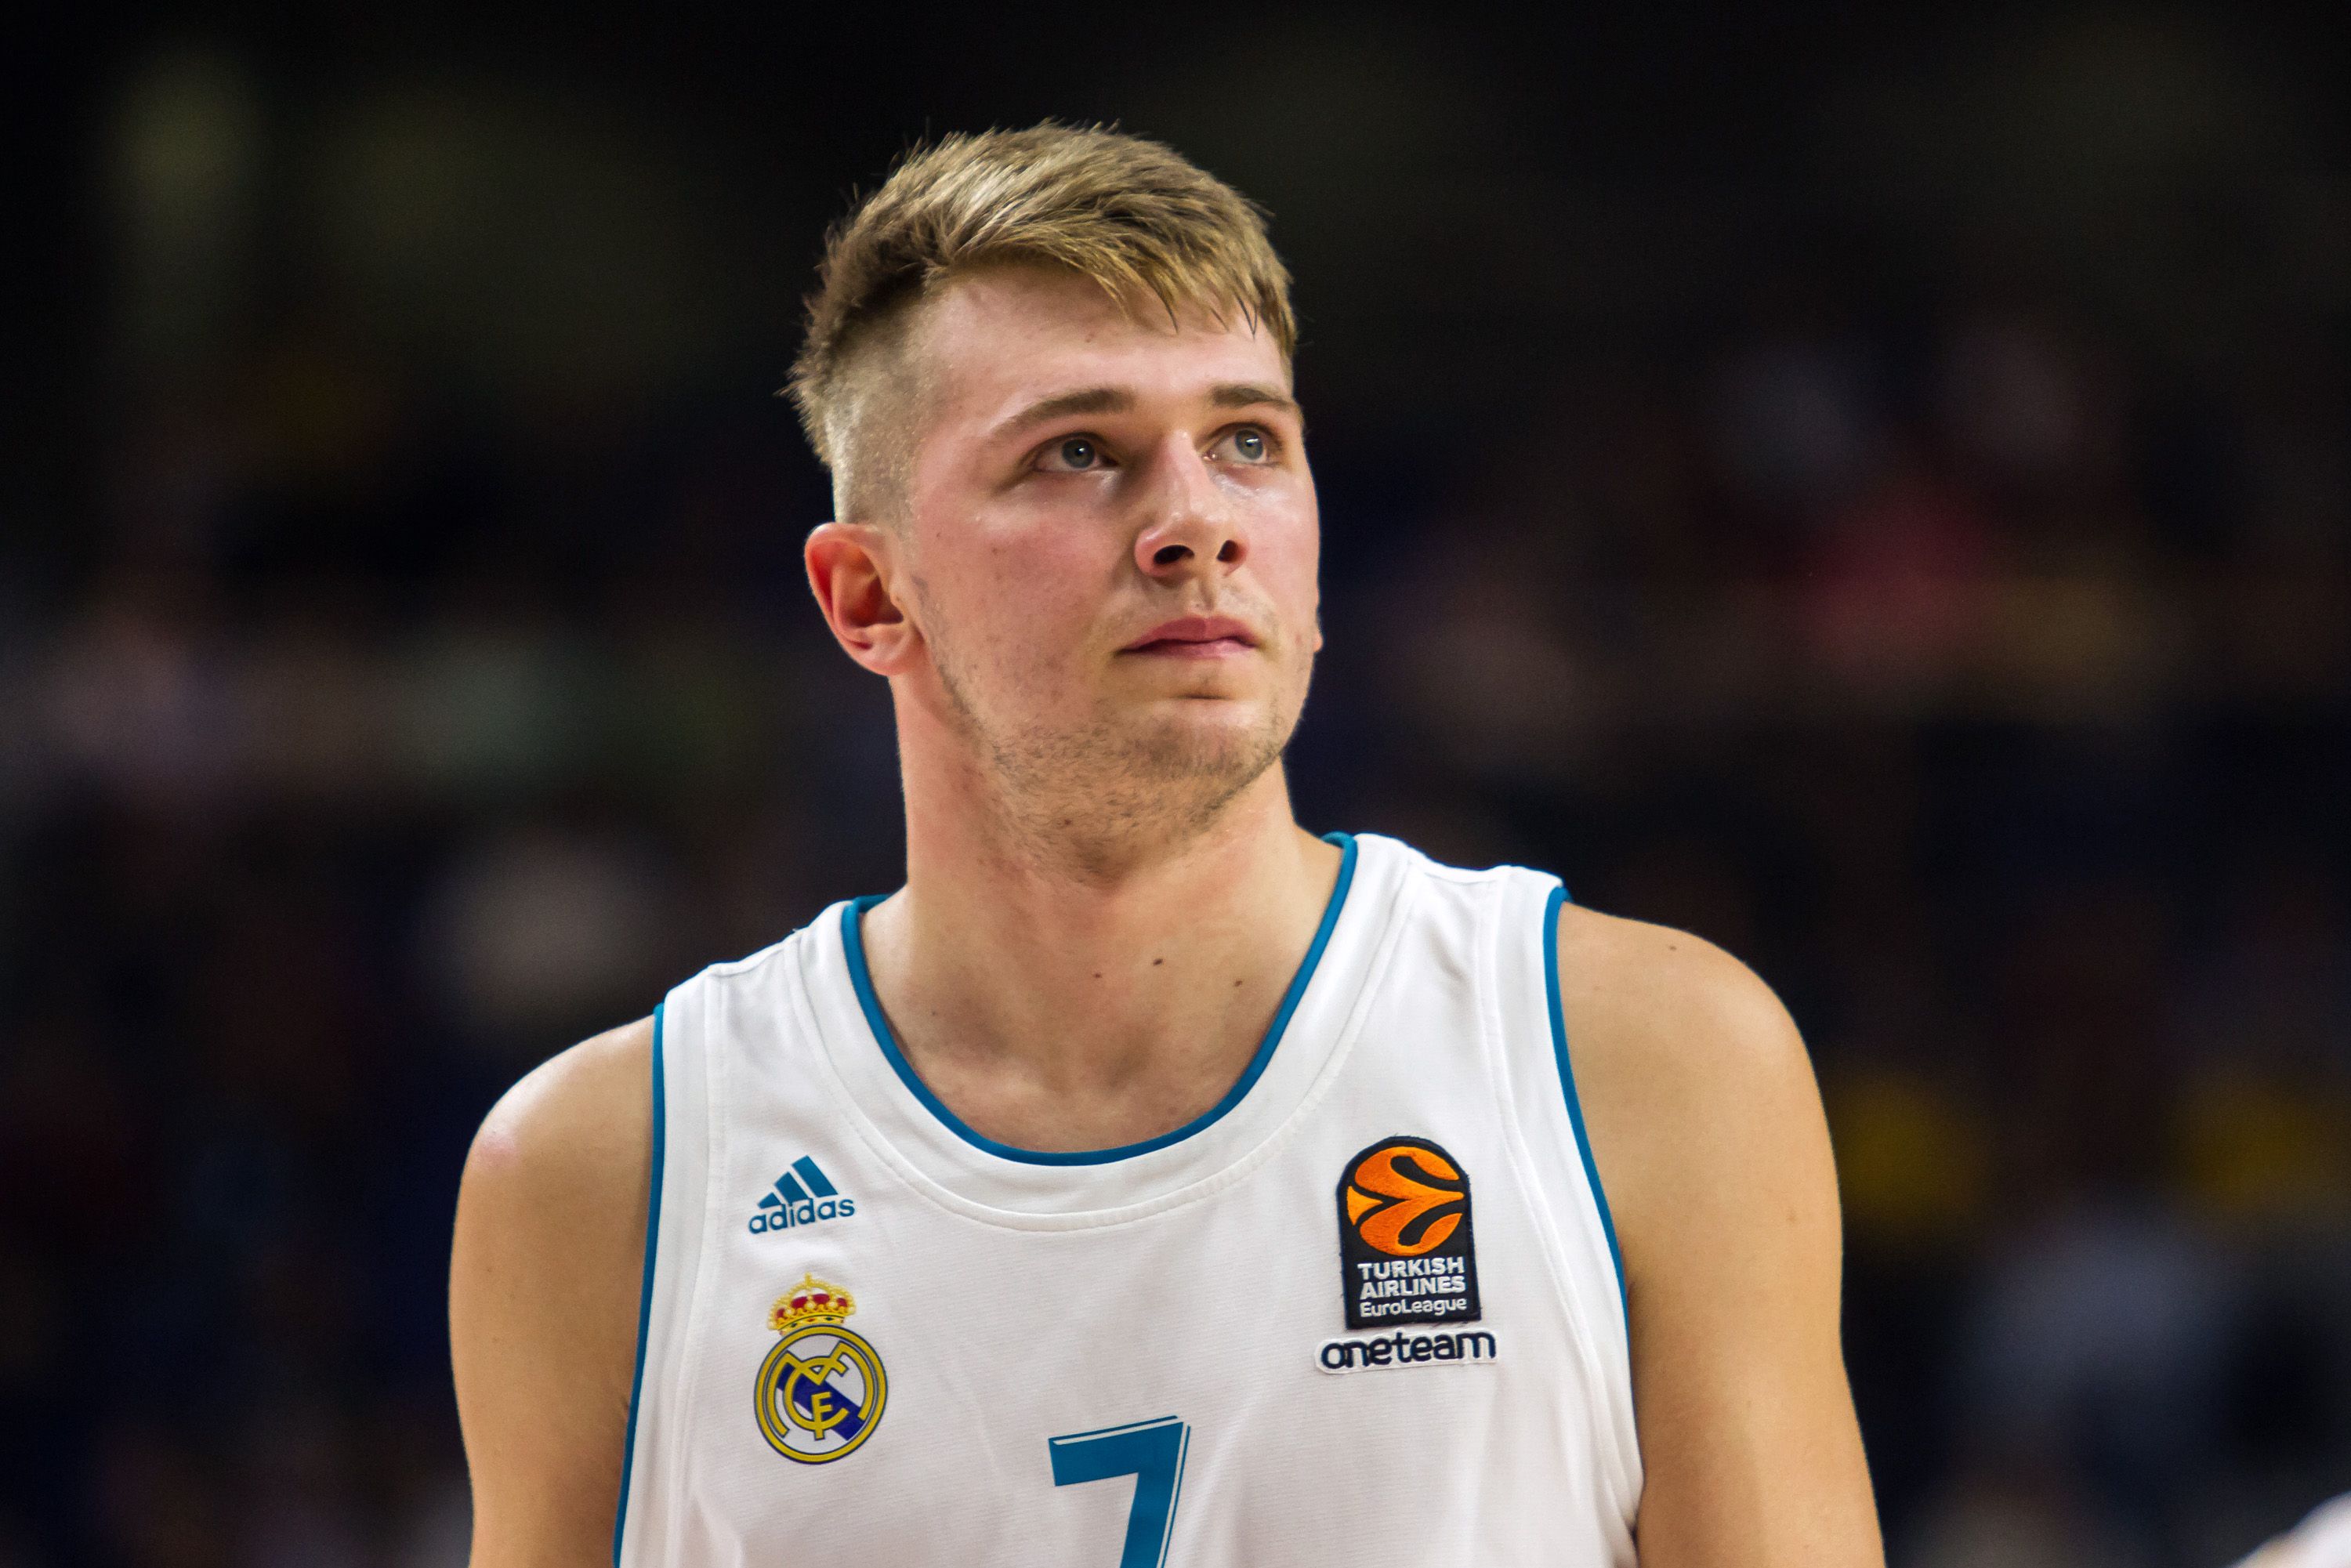 Draft Q&A: Hawks assistant GM Jeff Peterson on Luka Doncic